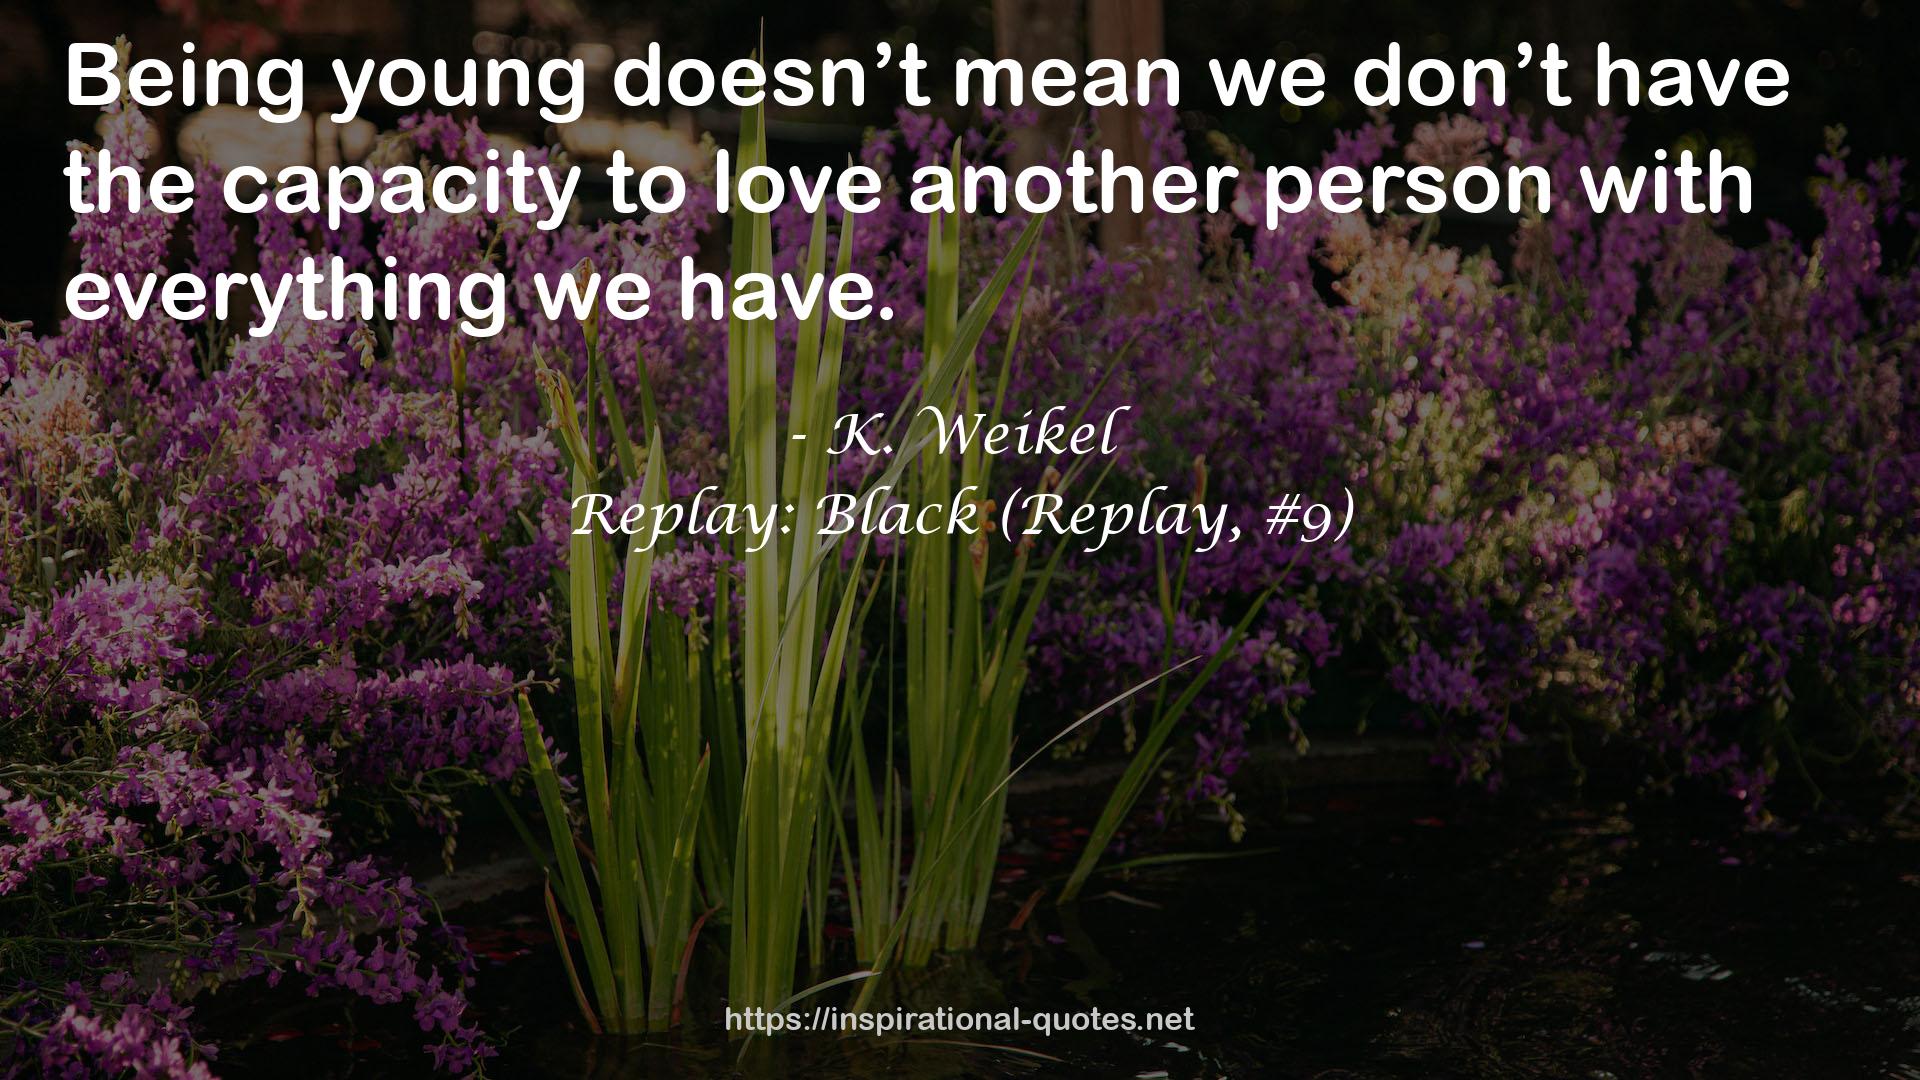 Replay: Black (Replay, #9) QUOTES